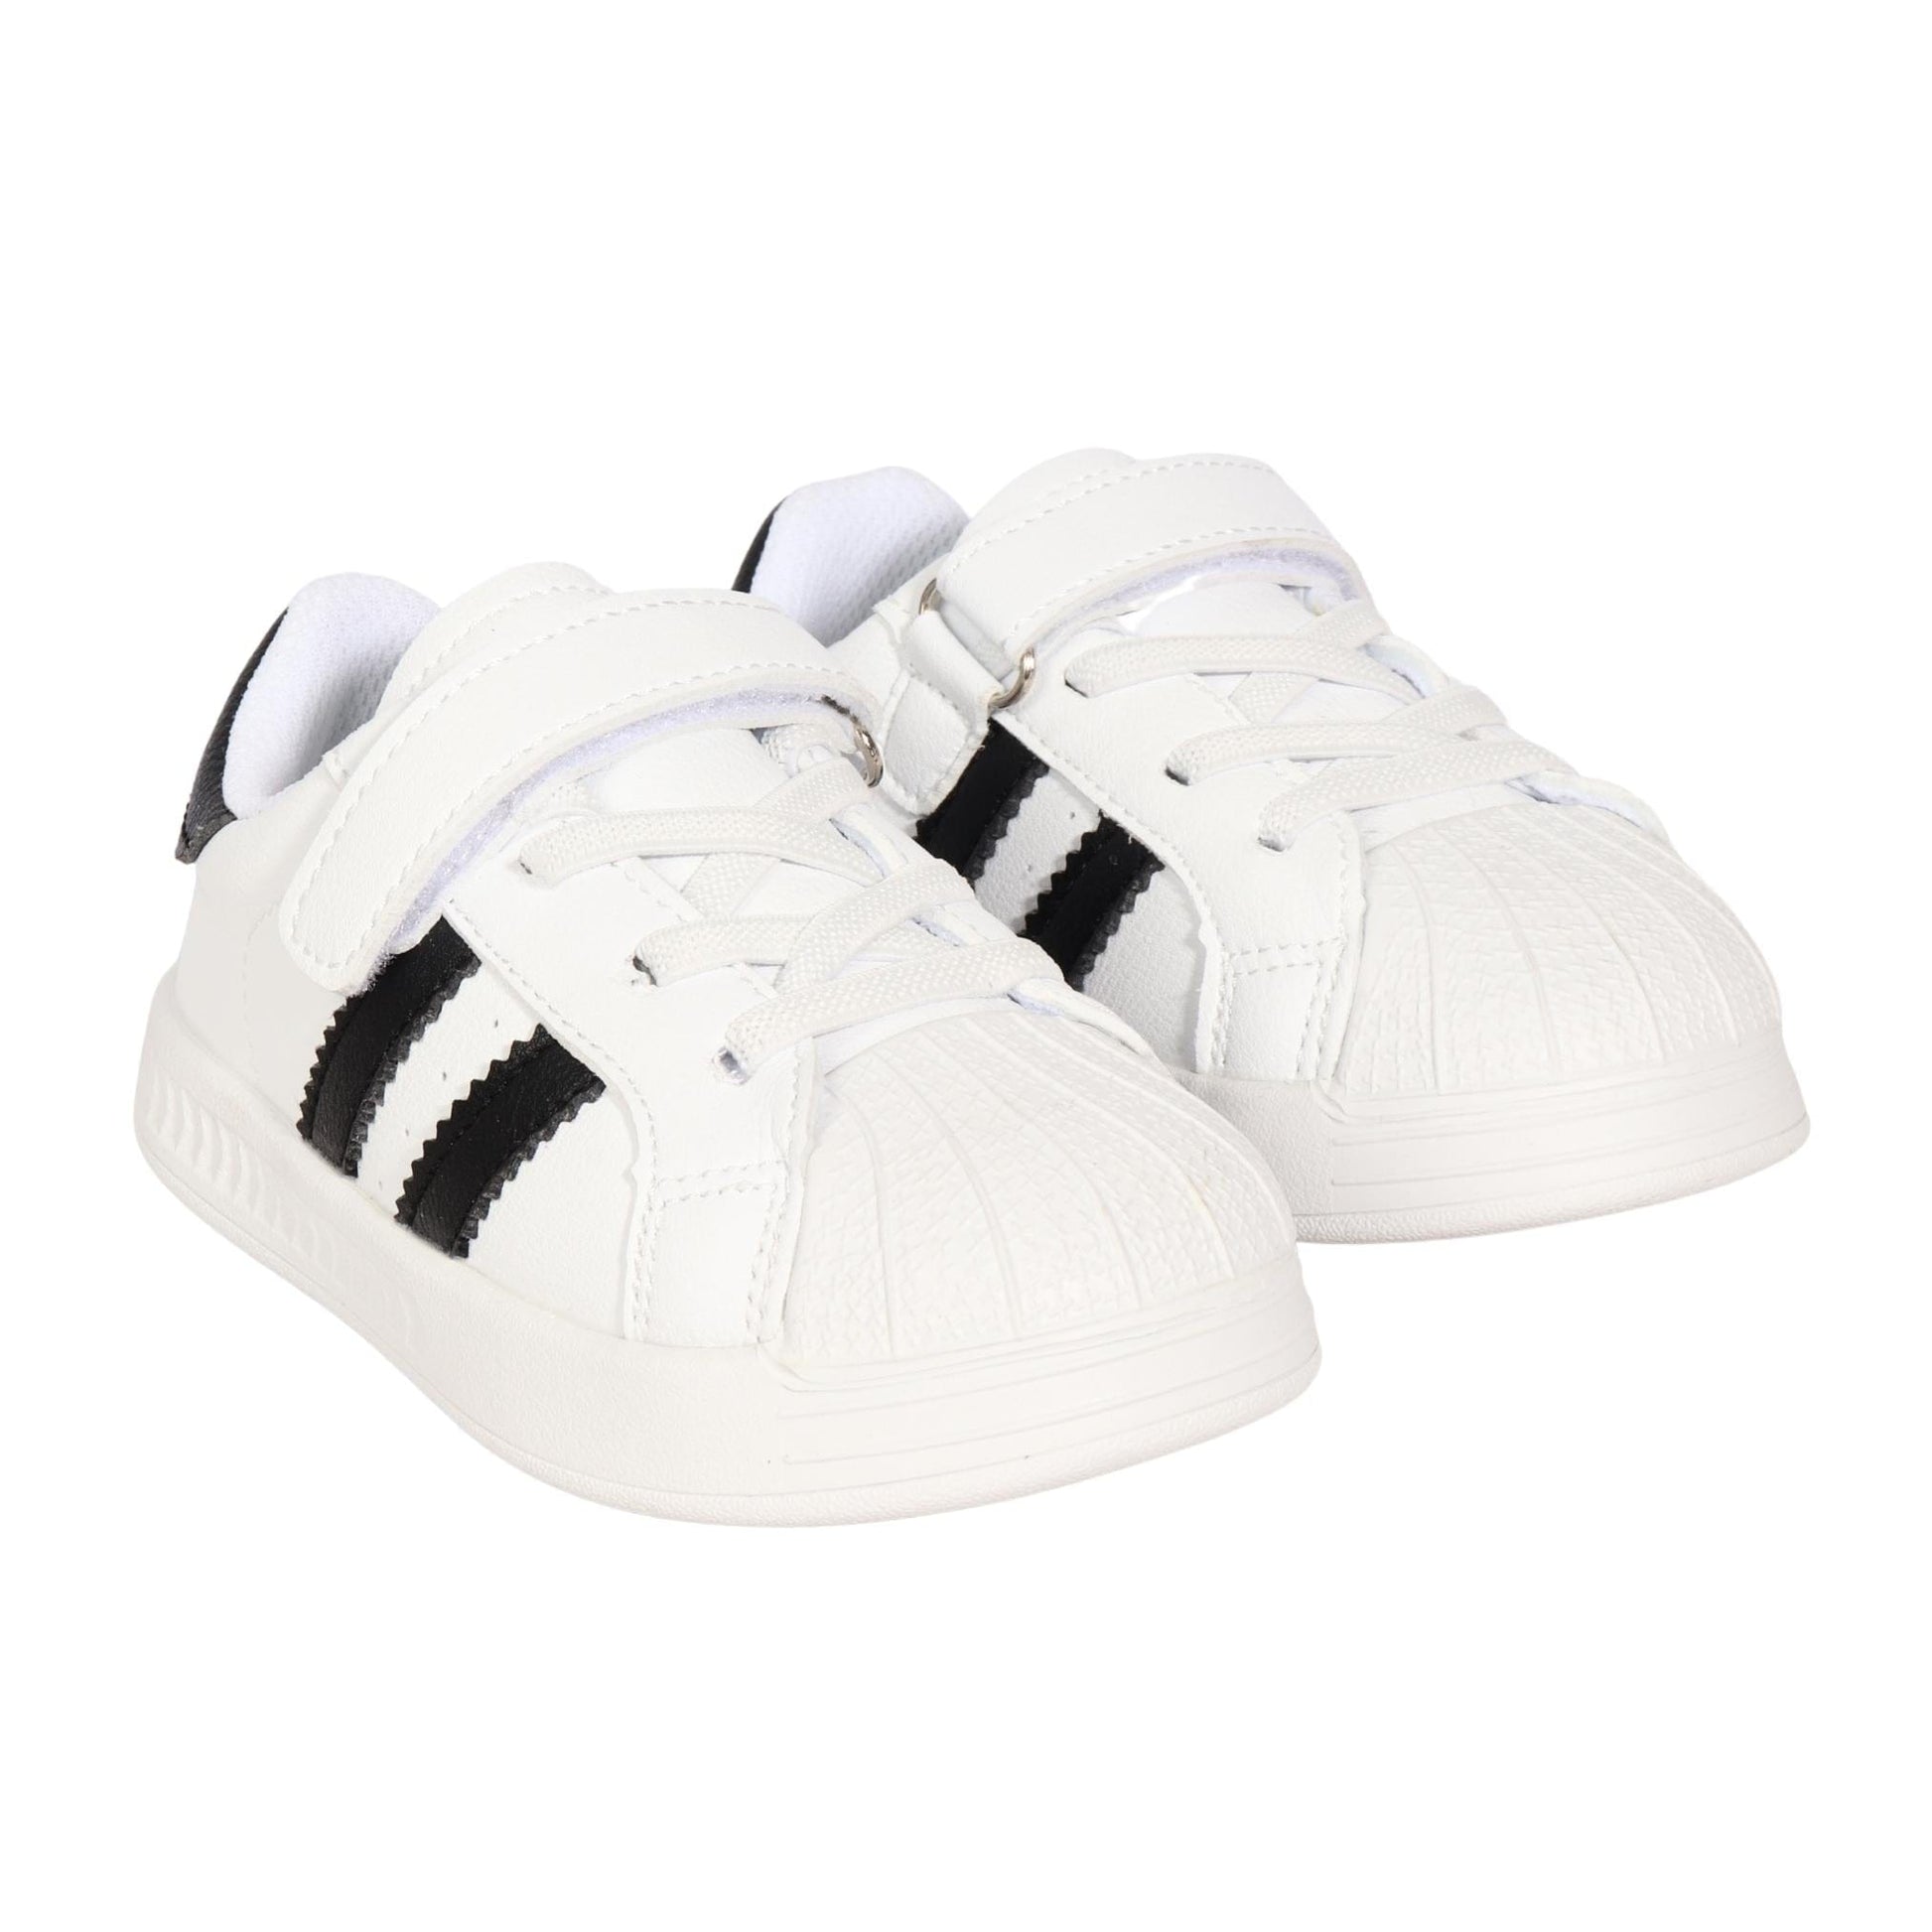 YOUNG LINGEN Baby Shoes 25 / White YOUNG LINGEN - Kids - Sneakers Strap Athletic Running Shoes